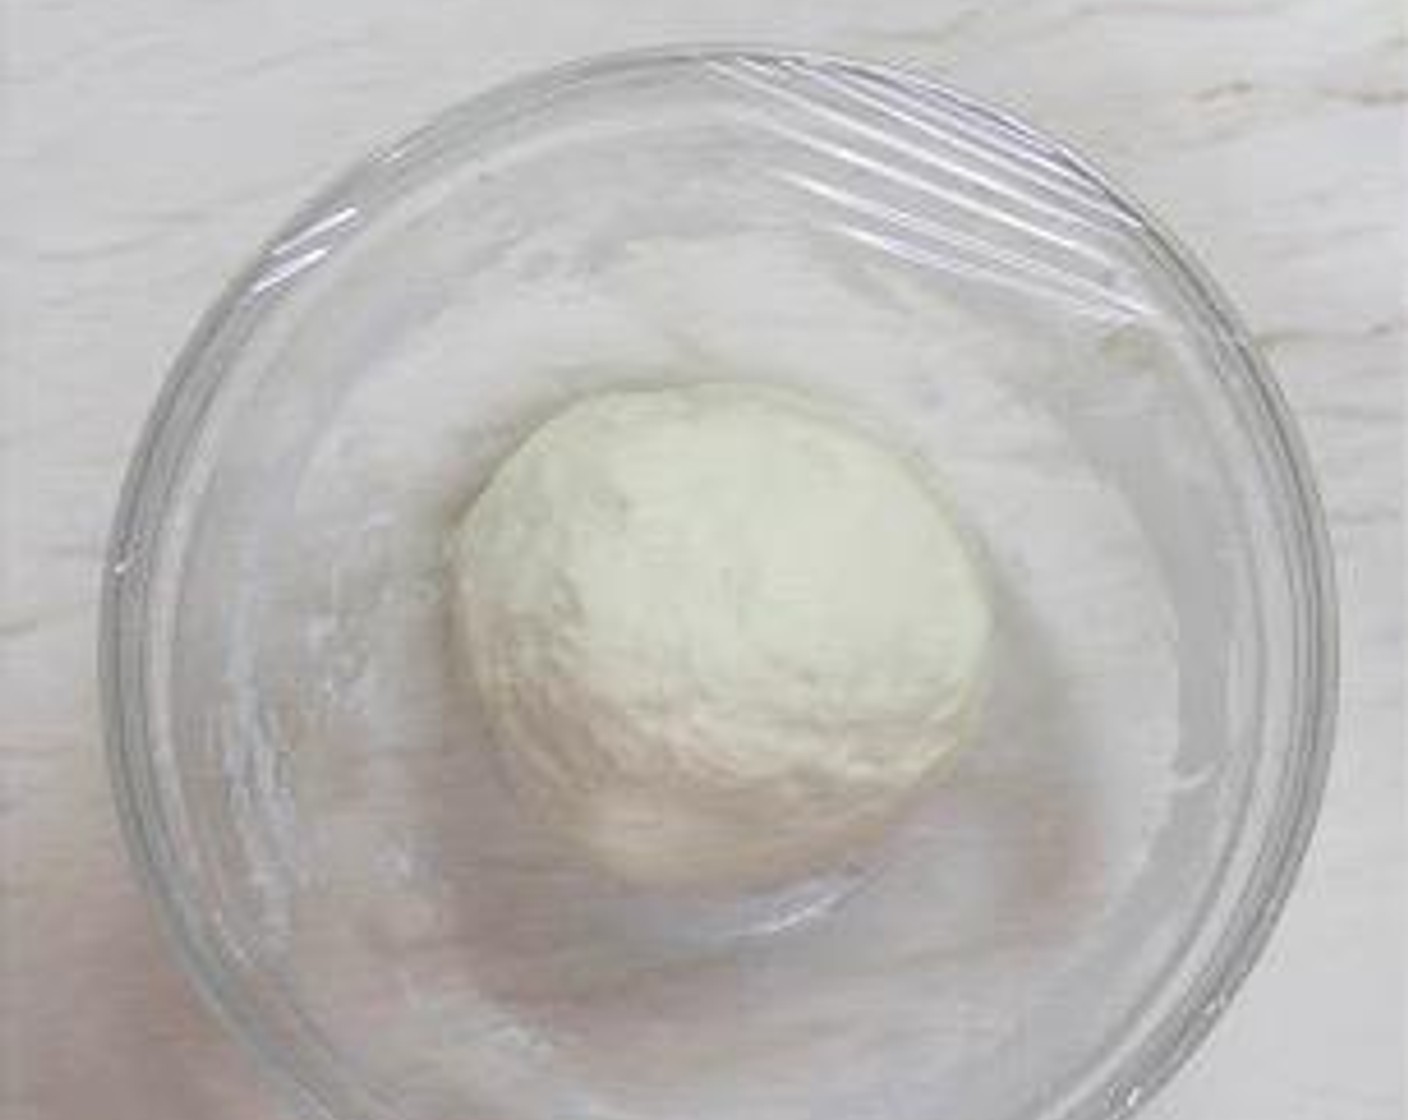 step 1 Combine Water (5 oz), Instant Dry Yeast (3/4 tsp), Salt (1 pinch), and Brown Sugar (3/4 tsp) in a mixing bowl. Mix in High-Gluten Bread Flour (1 1/2 cups) and knead with your hands for a few minutes, until smooth and shiny. Roll into a ball and place in a greased bowl. Cover with cling film and let rise for 1 hour in a warm and dark place.